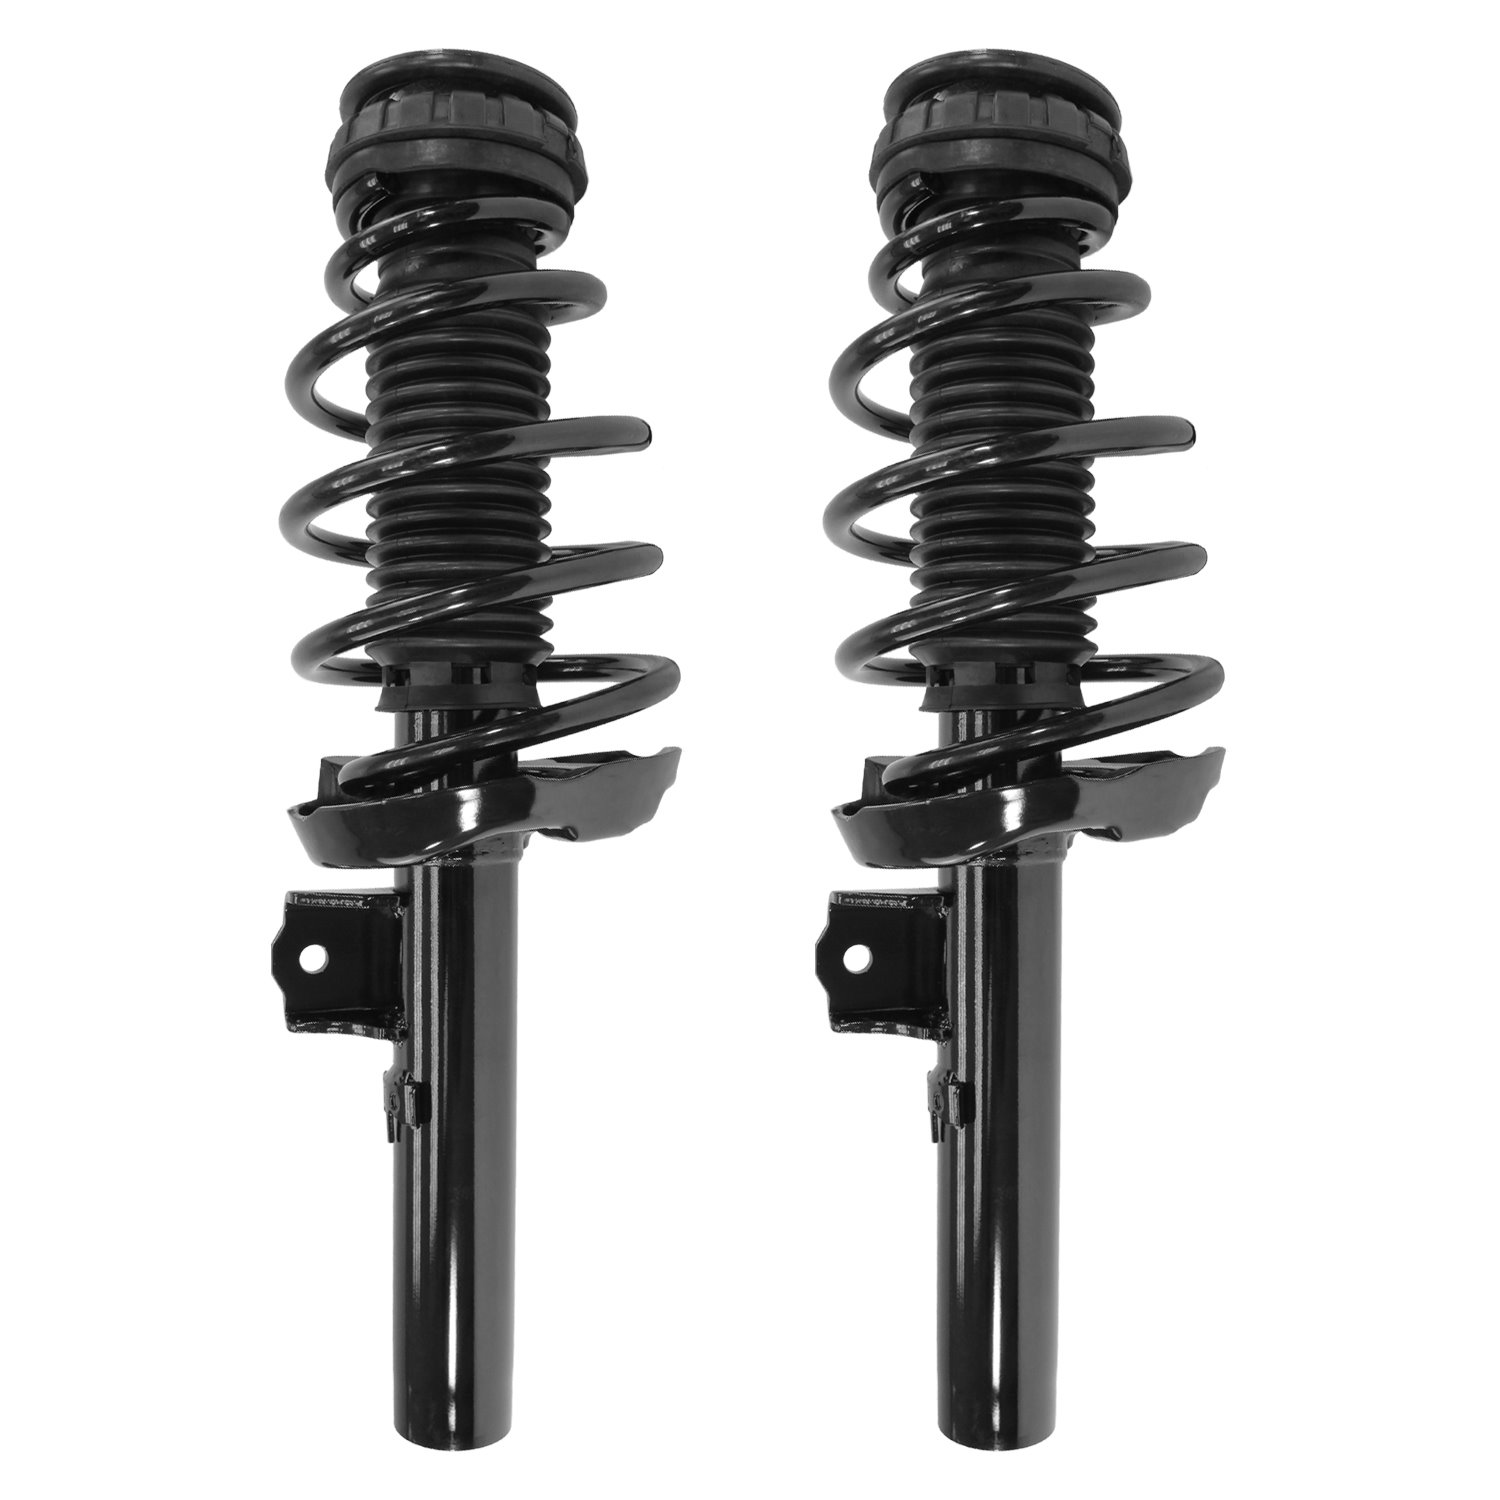 2-13490-001 Front Suspension Strut & Coil Spring Assemby Set Fits Select Cadillac XTS